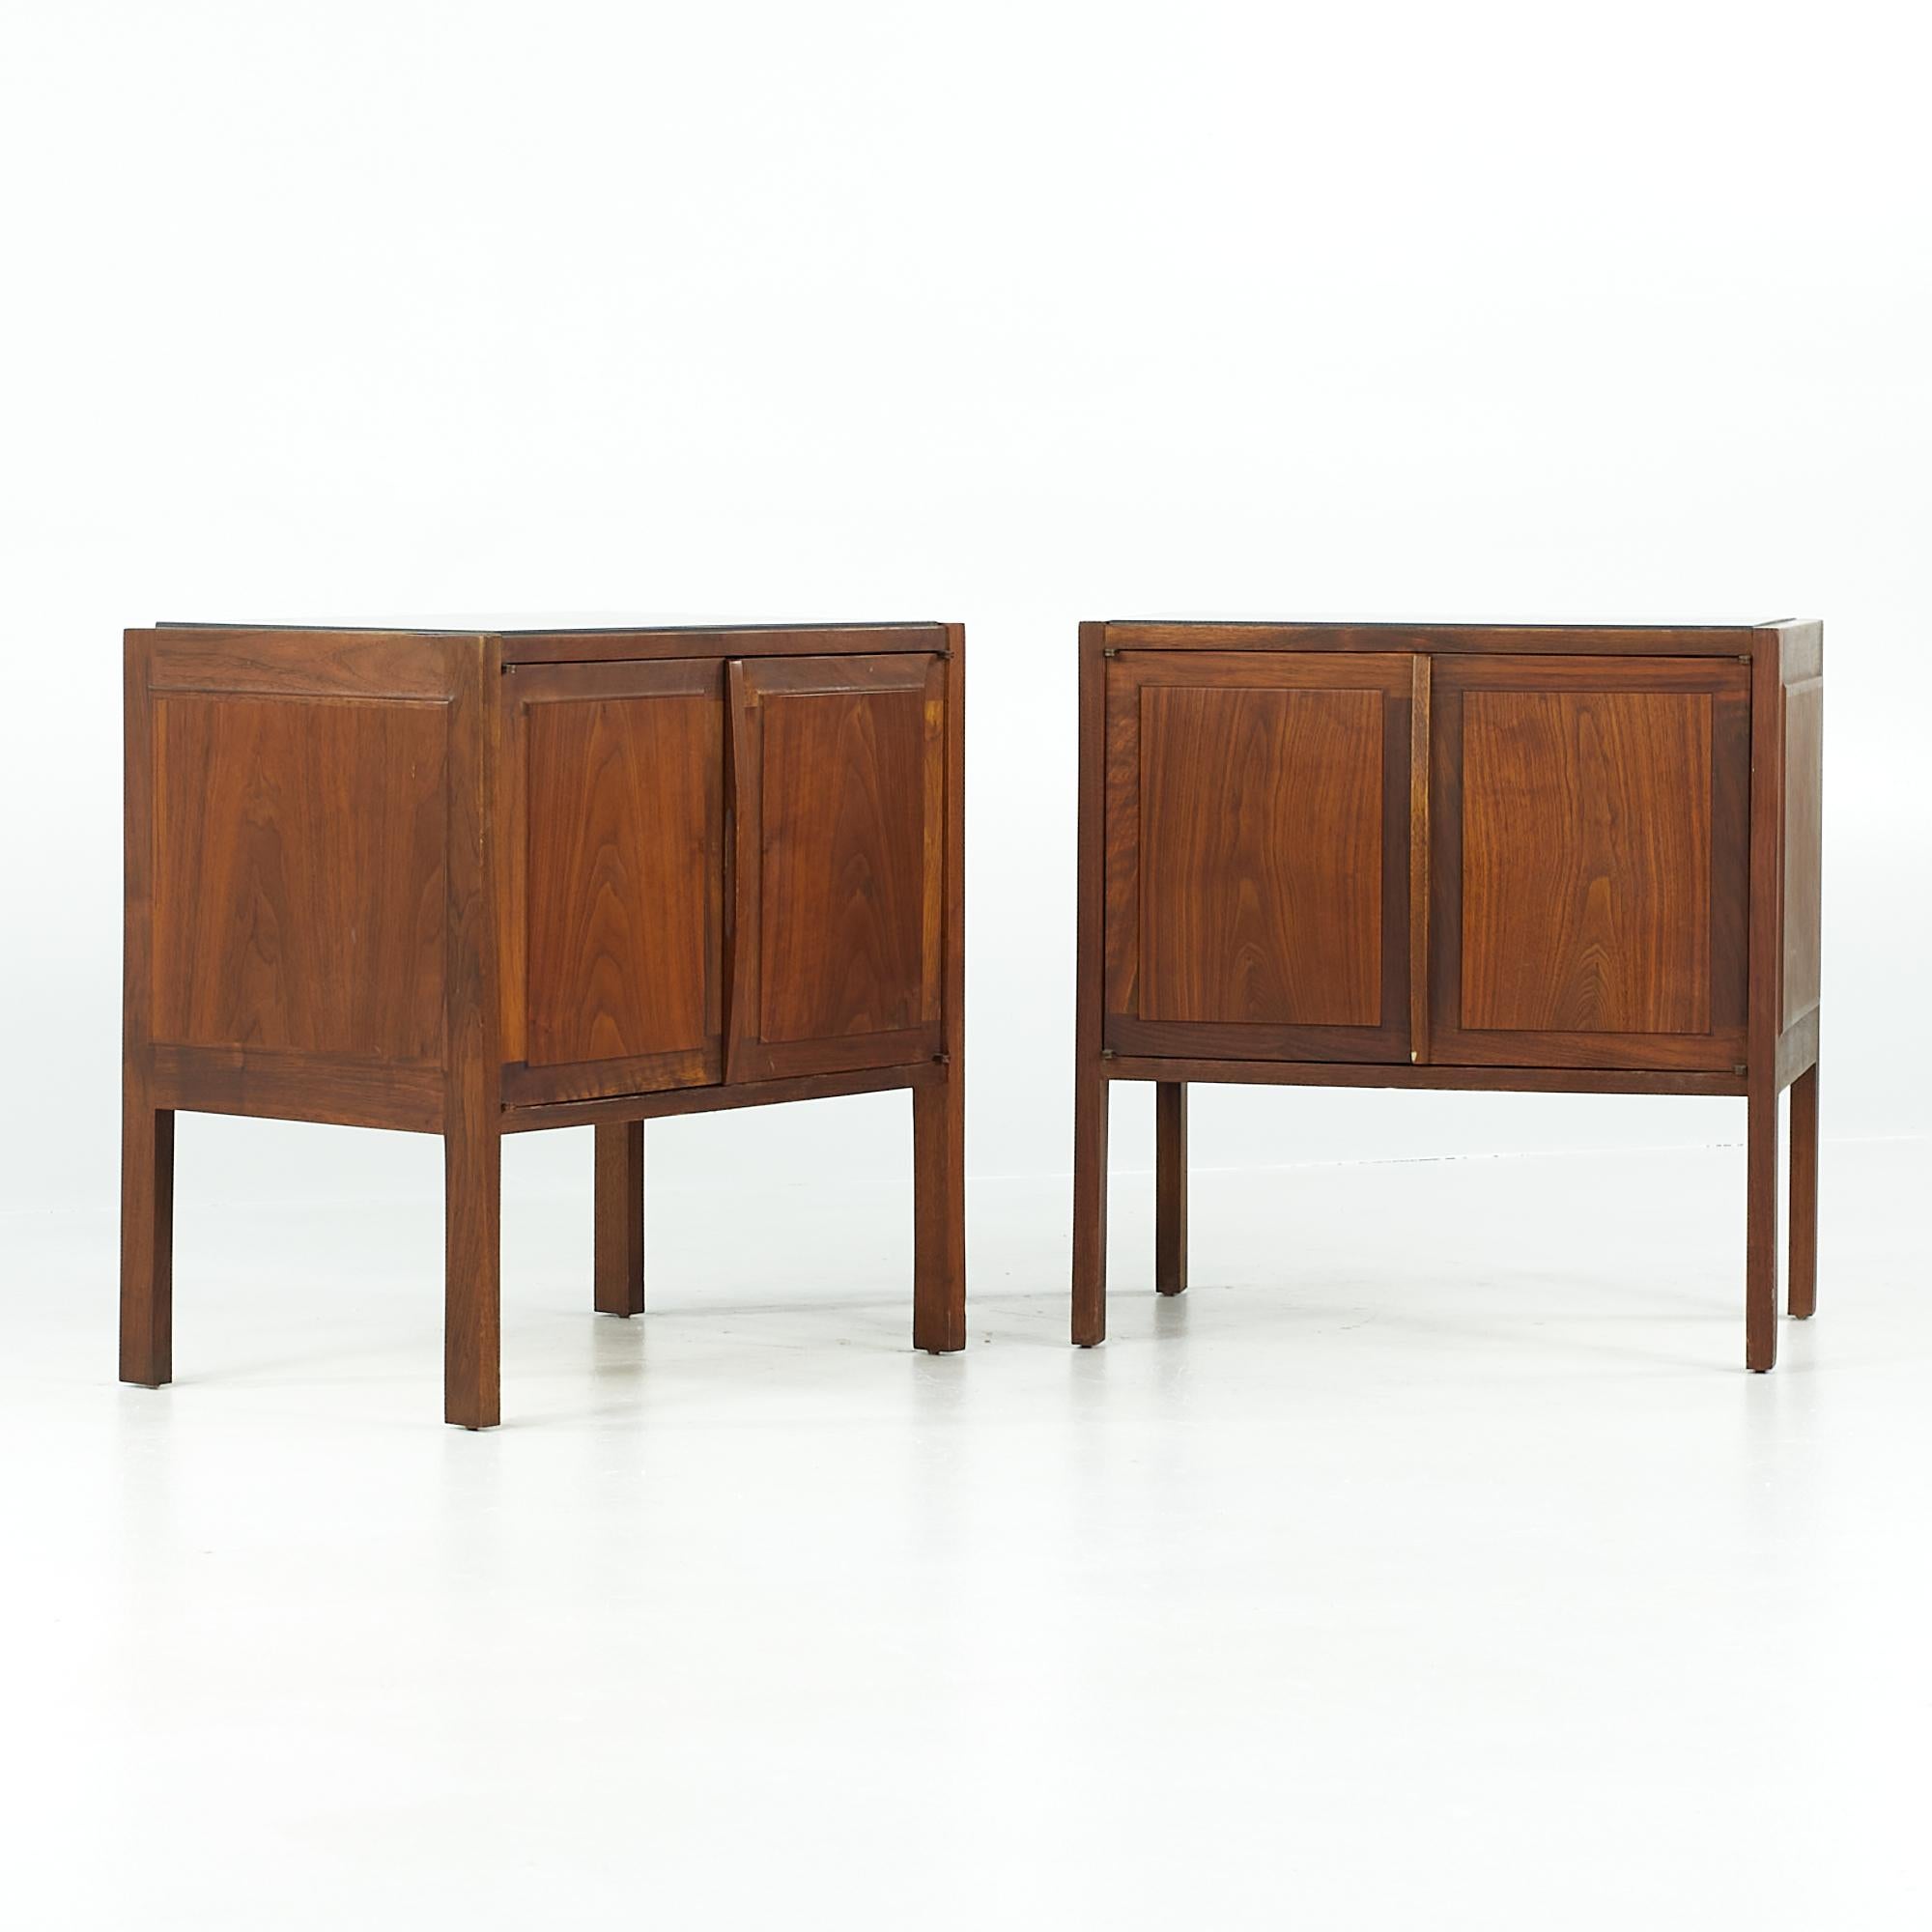 Jack Cartwright for Founders midcentury walnut nightstands - pair

Each nightstand measures: 22.25 wide x 15 deep x 23.25 inches high

All pieces of furniture can be had in what we call restored vintage condition. That means the piece is